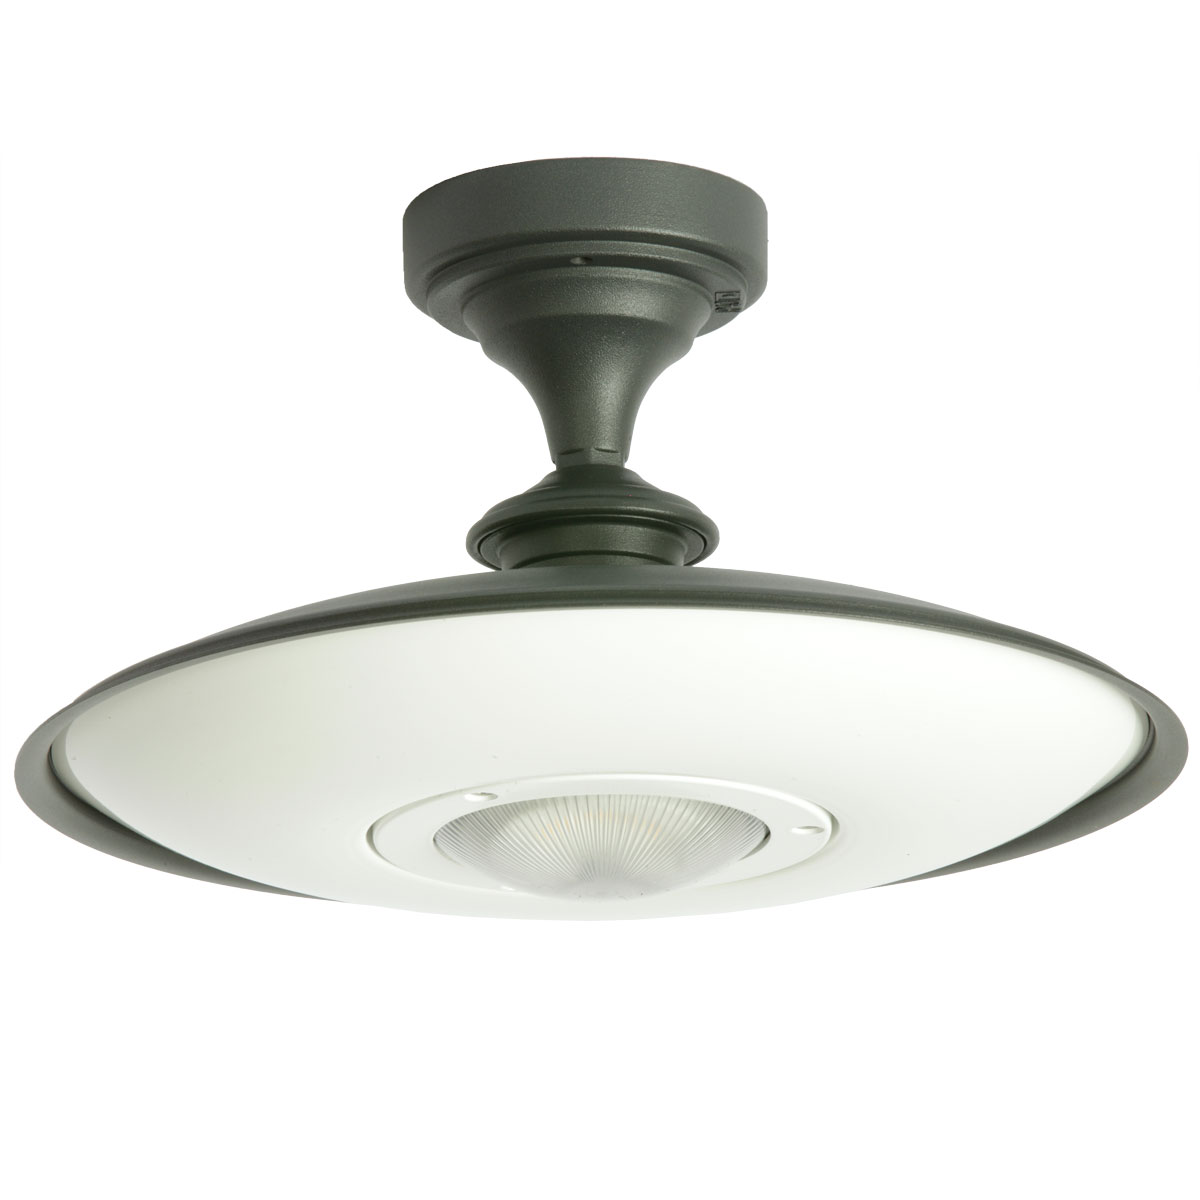 LED-Ceiling Light for Outdoors with Protection Class IP 65